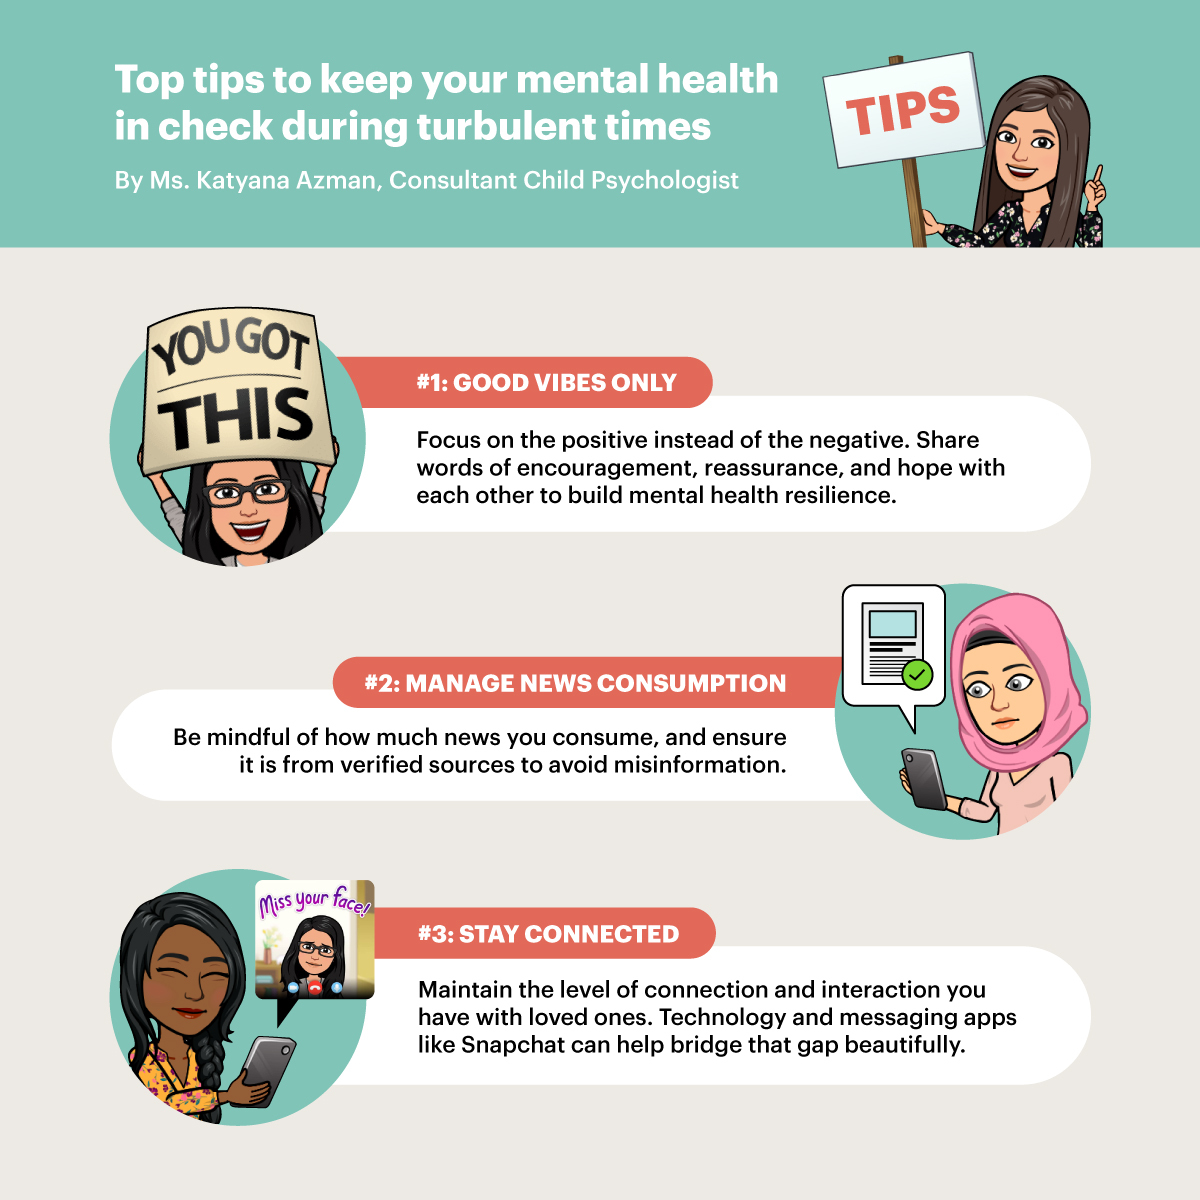 Top tips to keep your mental health in check during turbulent times by Ms Katyana